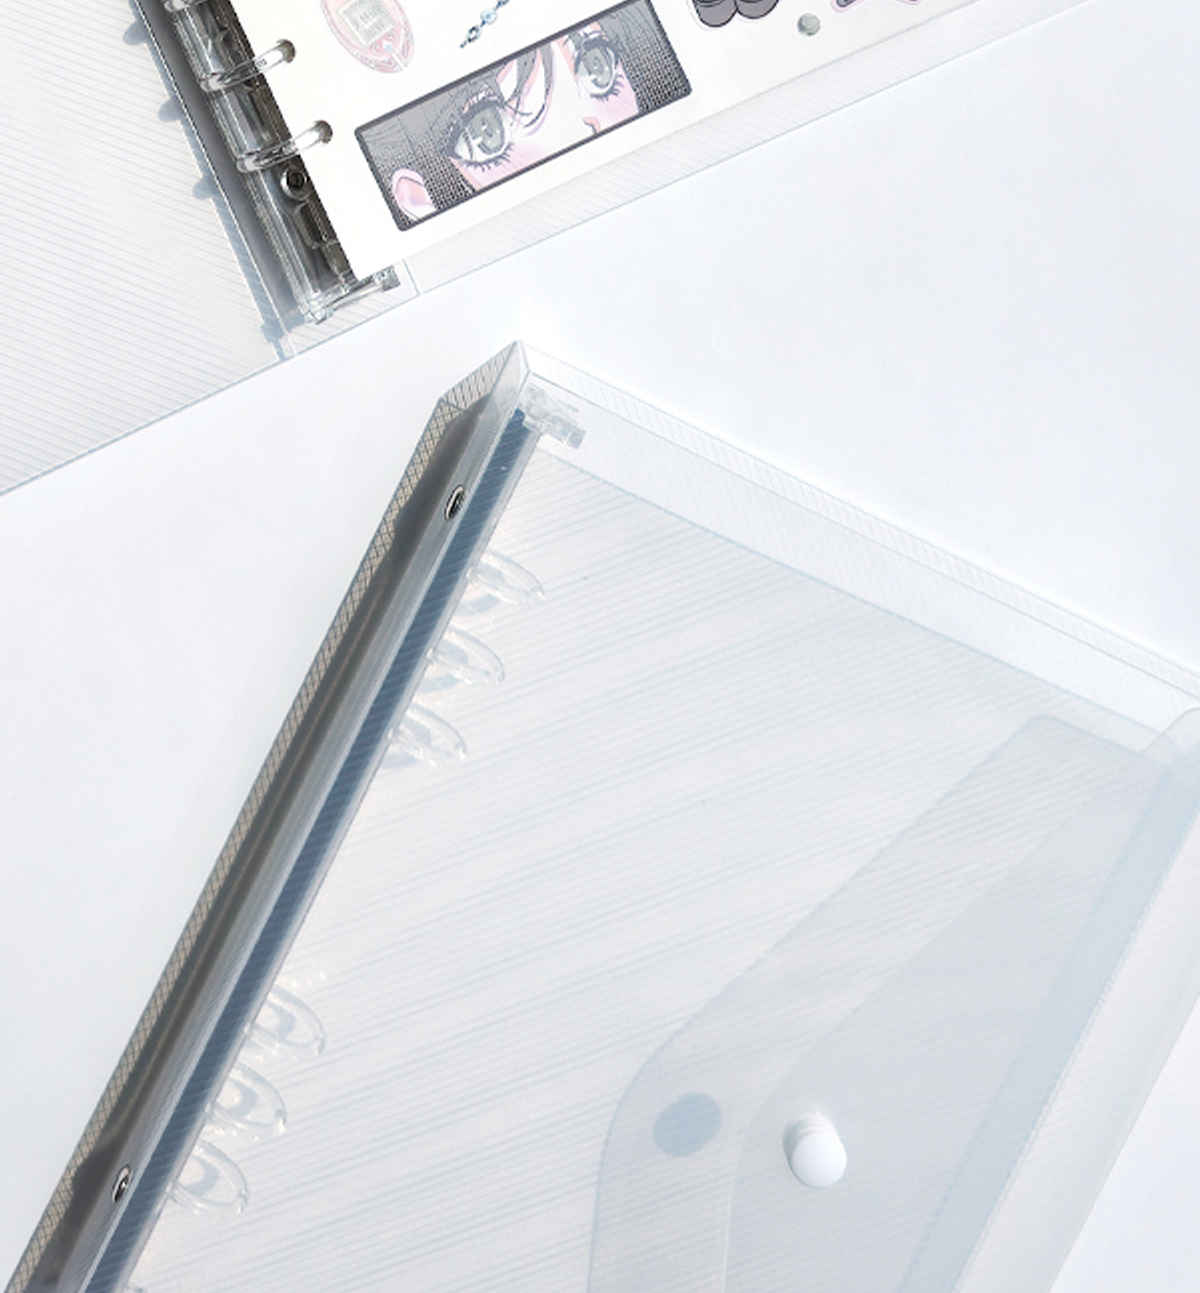 A5 Clear Button Binder Cover